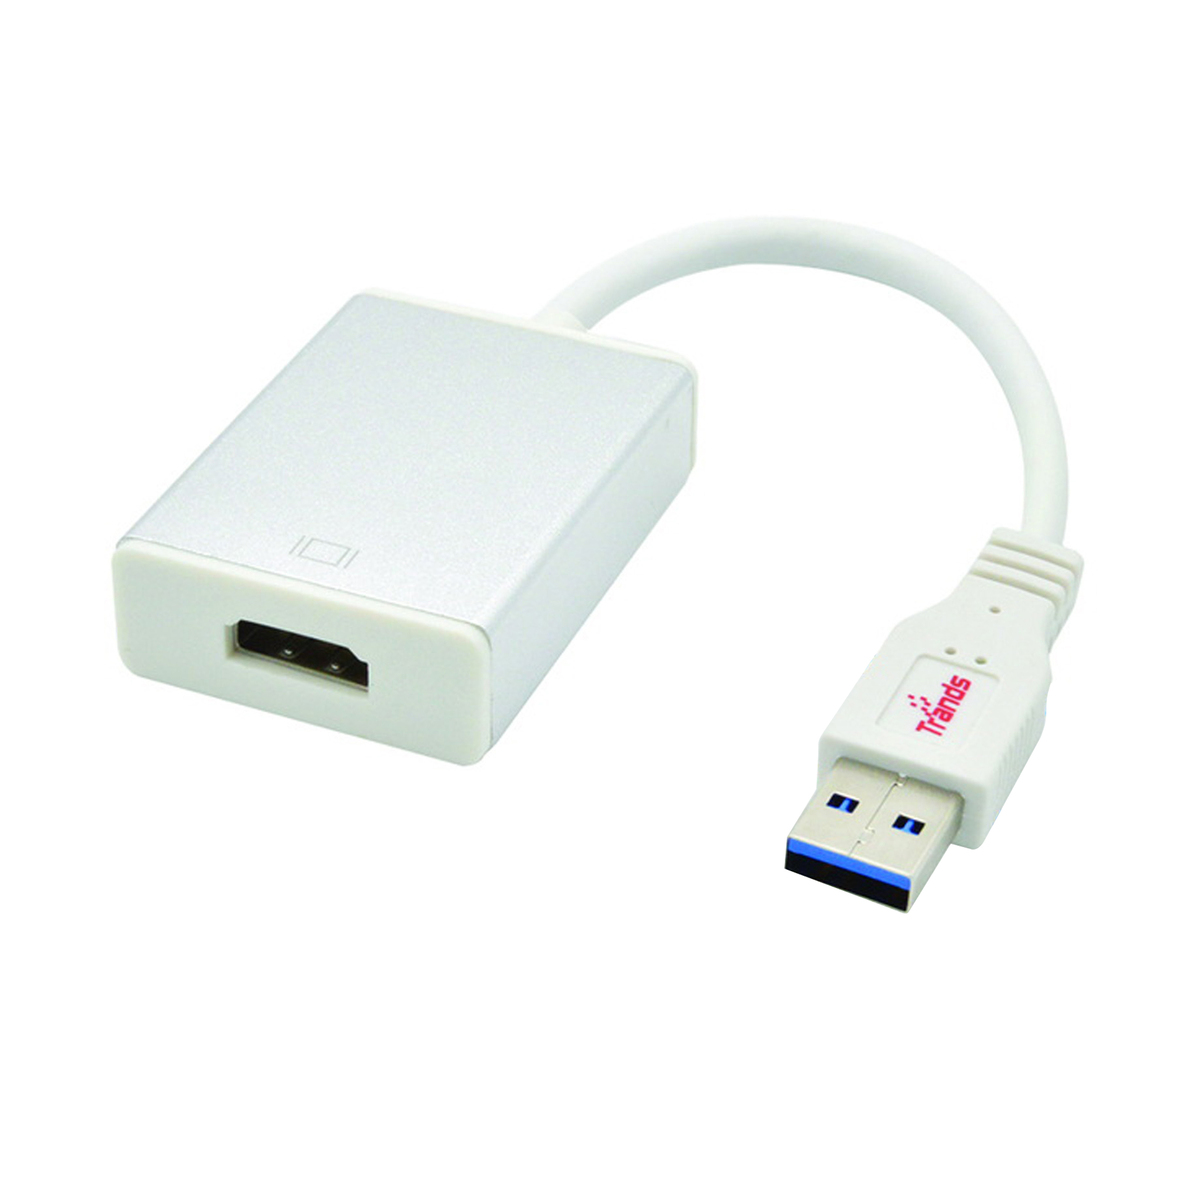 Trands USB 3.0 to HDMI Female Adapter, TR-CA036